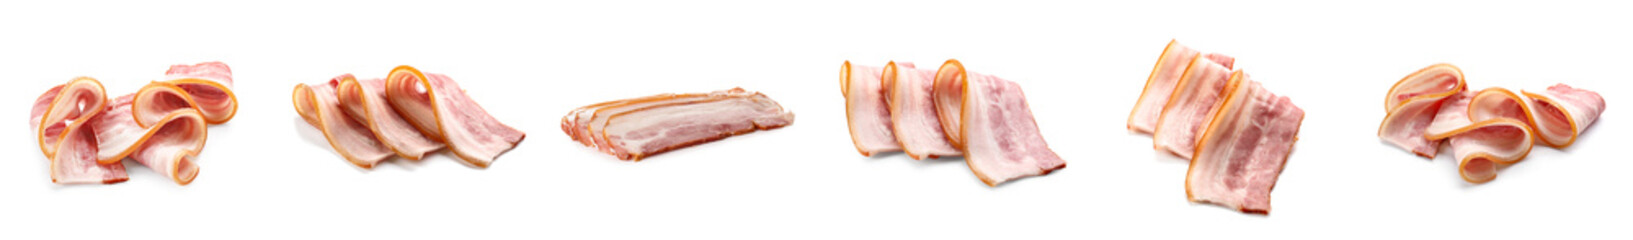 Slices of bacon slices on white background